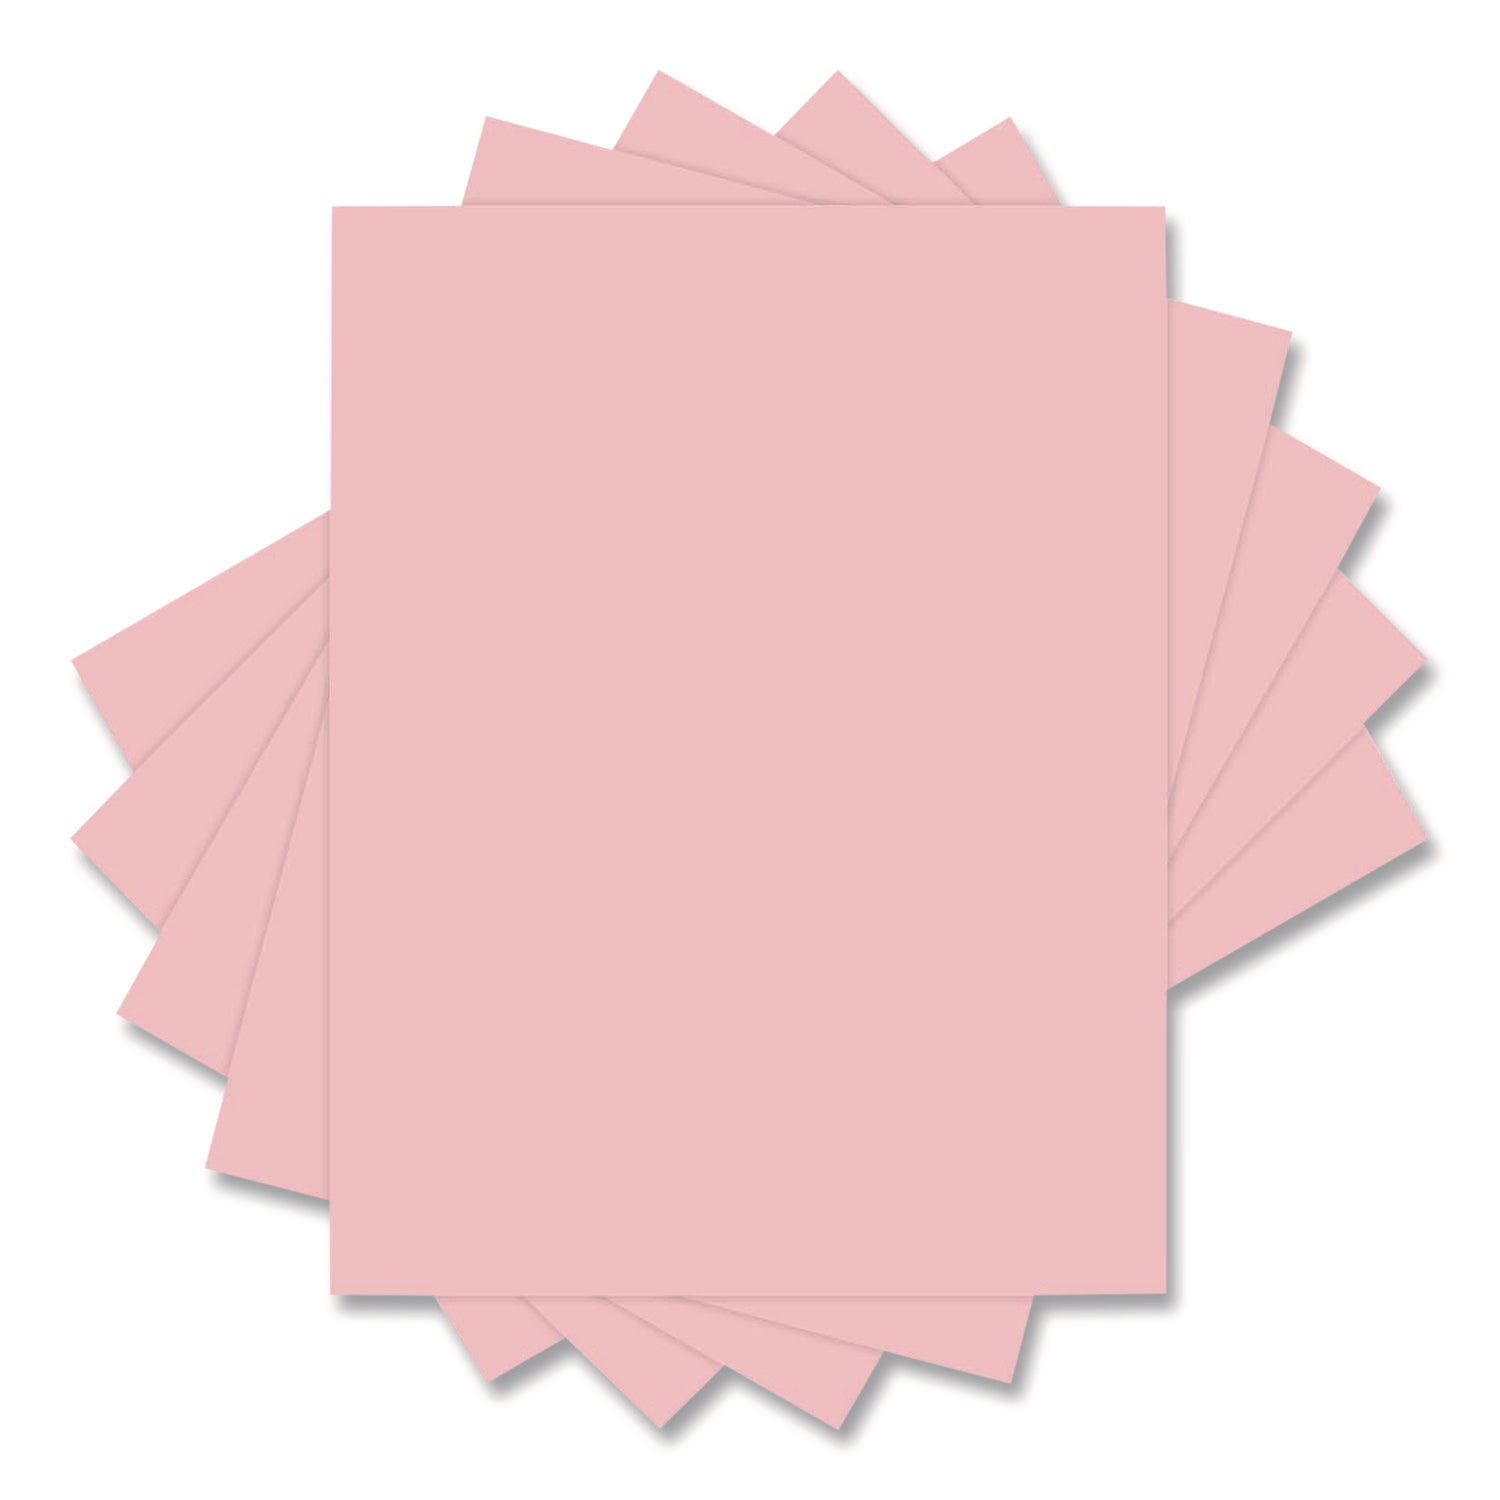 Deluxe Colored Paper, 20 lb Bond Weight, 8.5 x 11, Pink, 500/Ream - 4